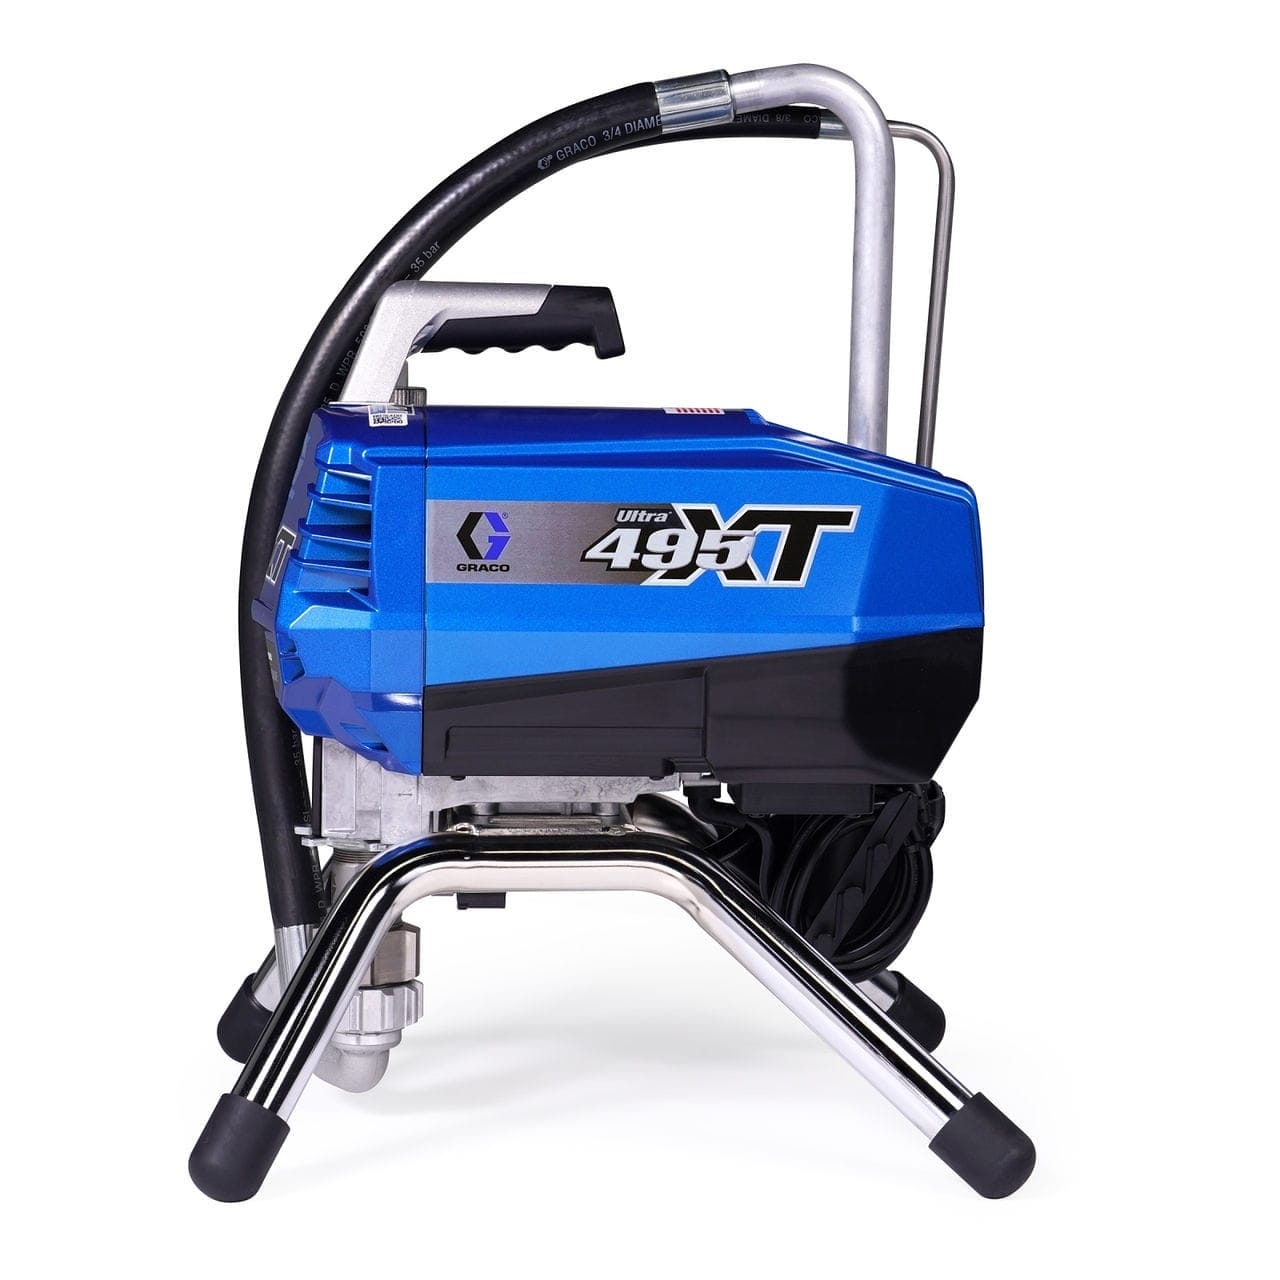 Graco Ultra 495 XT Electric Airless Sprayer, Stand